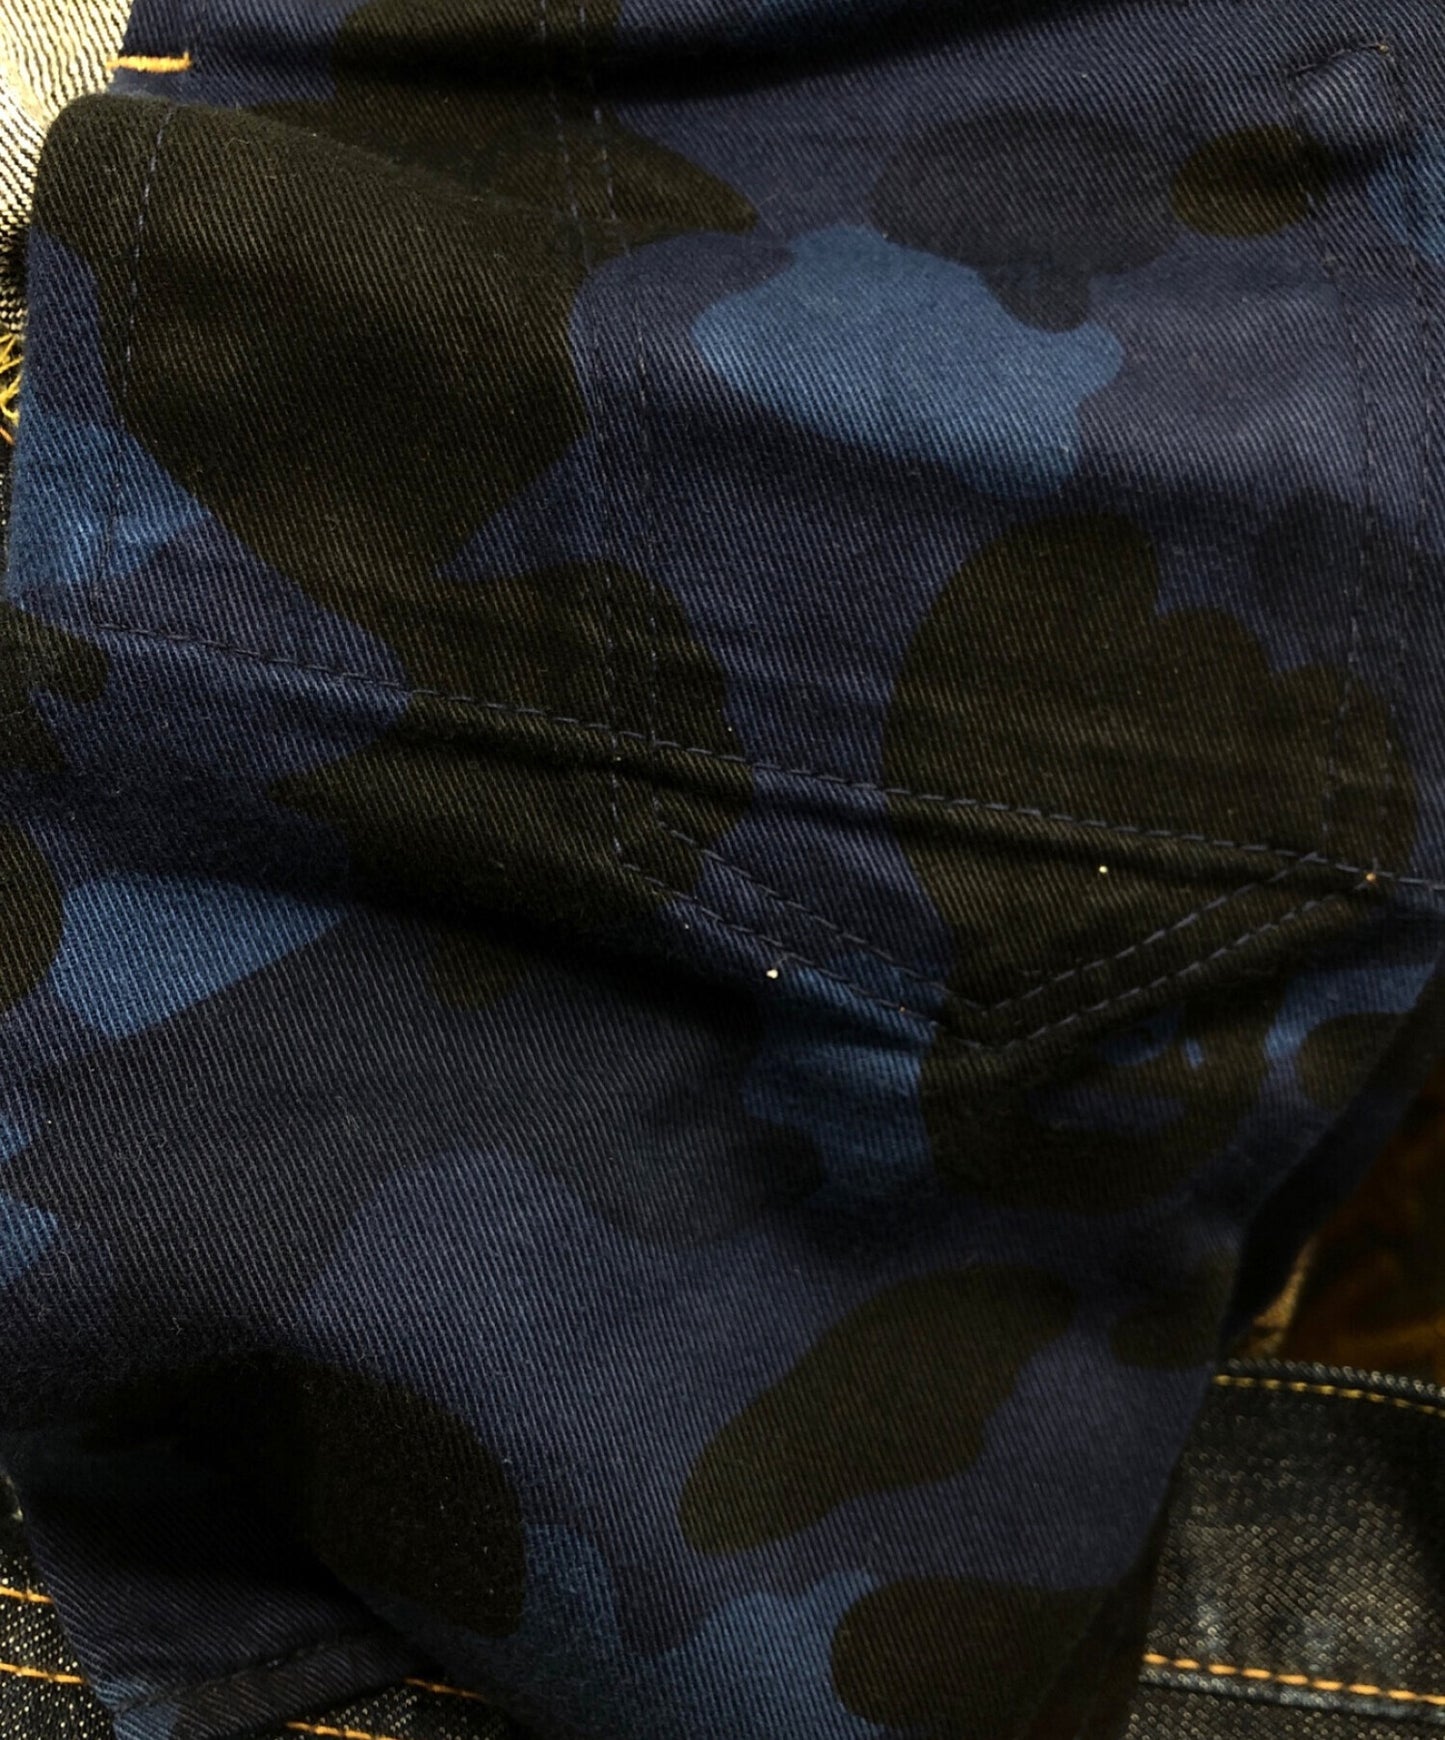 [Pre-owned] A BATHING APE Embroidered denim half pants